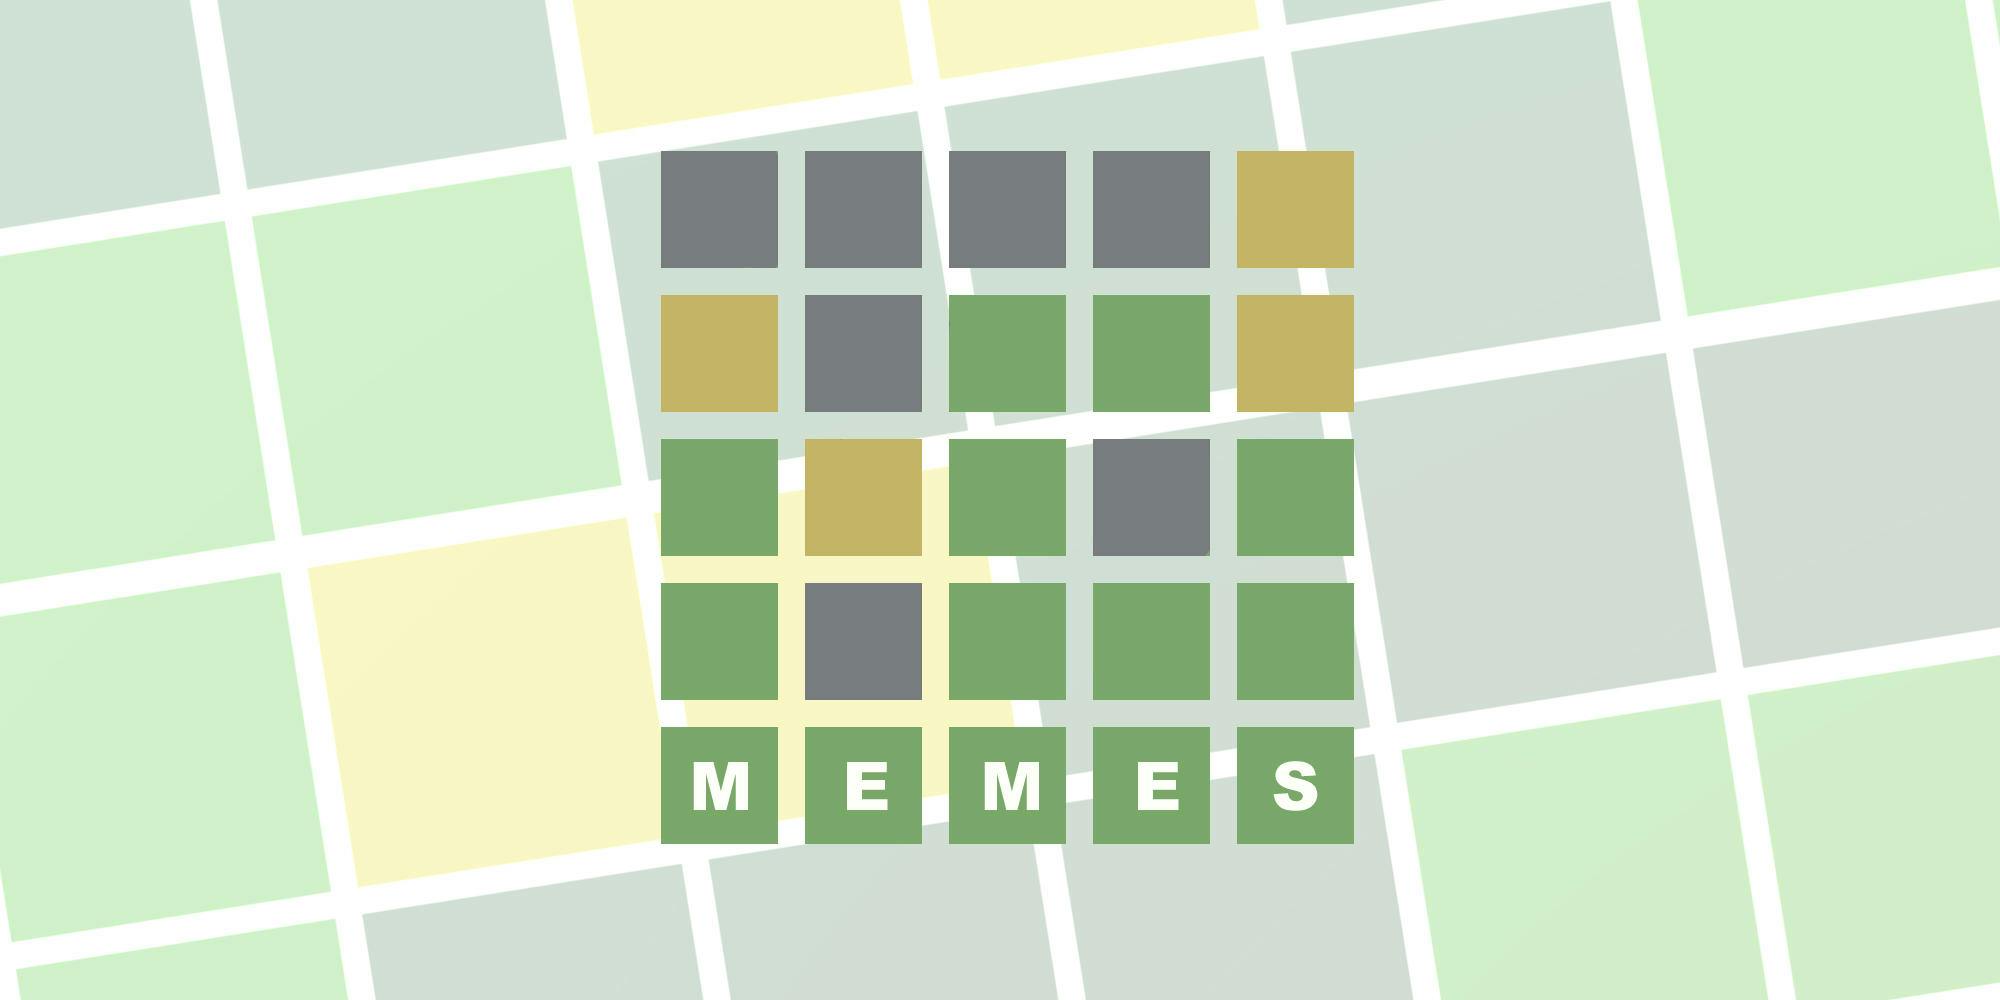 Illustration of a Wordle online game spelling out the word "meme"